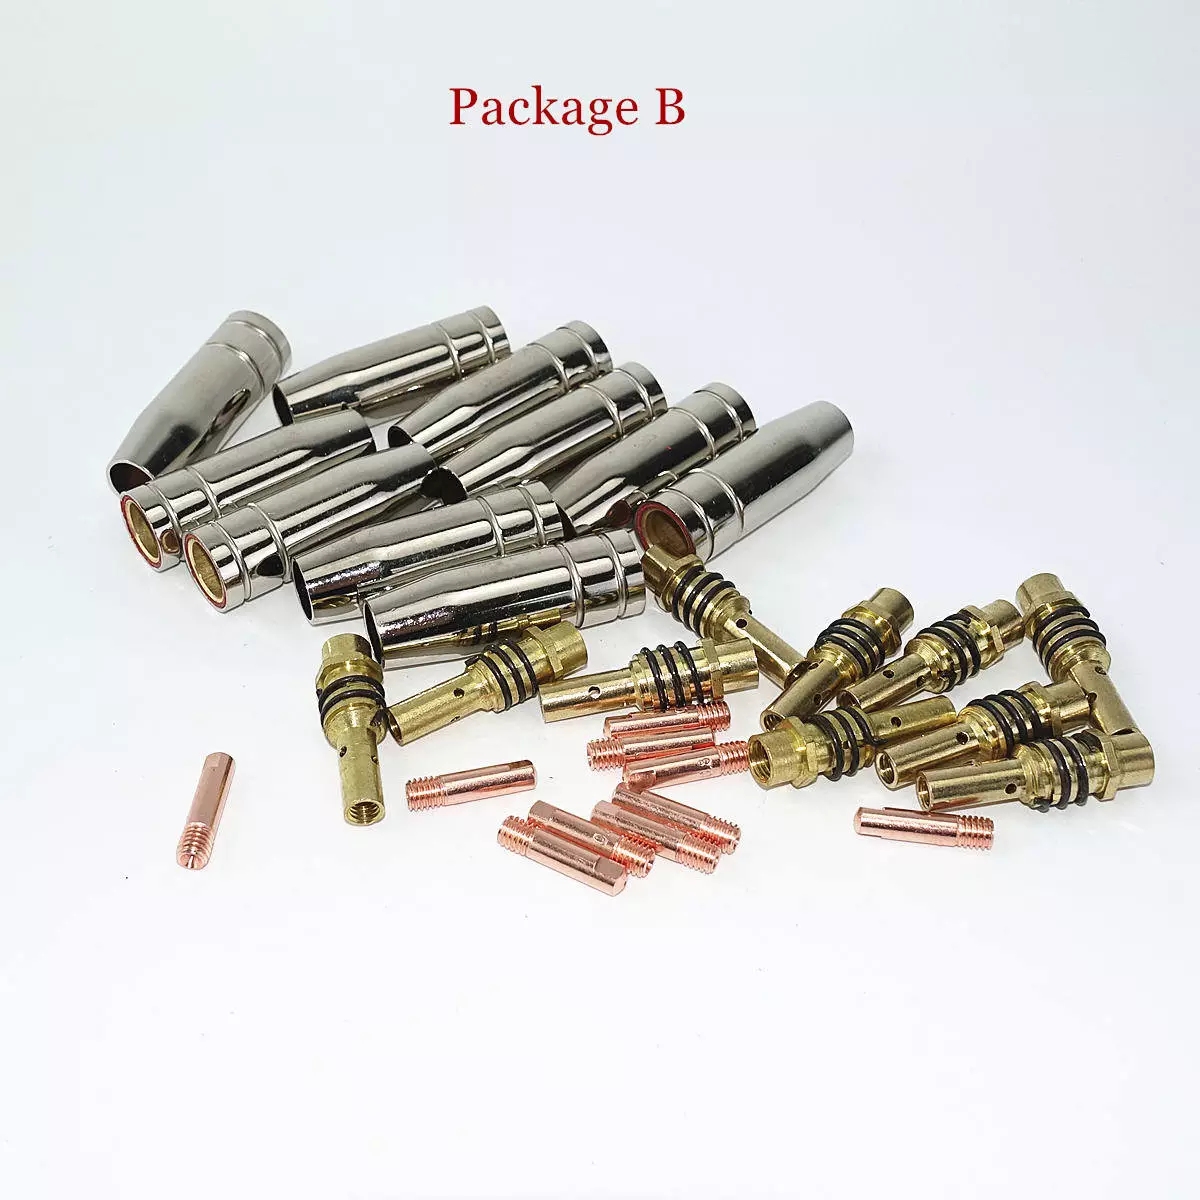 15AK-Welding-Torch-Consumables-eu-Style-180A-MIG-Torch-Nozzle-Gaas-Tips-Guun-Holder-Wrench-Neck-for--1853392-4